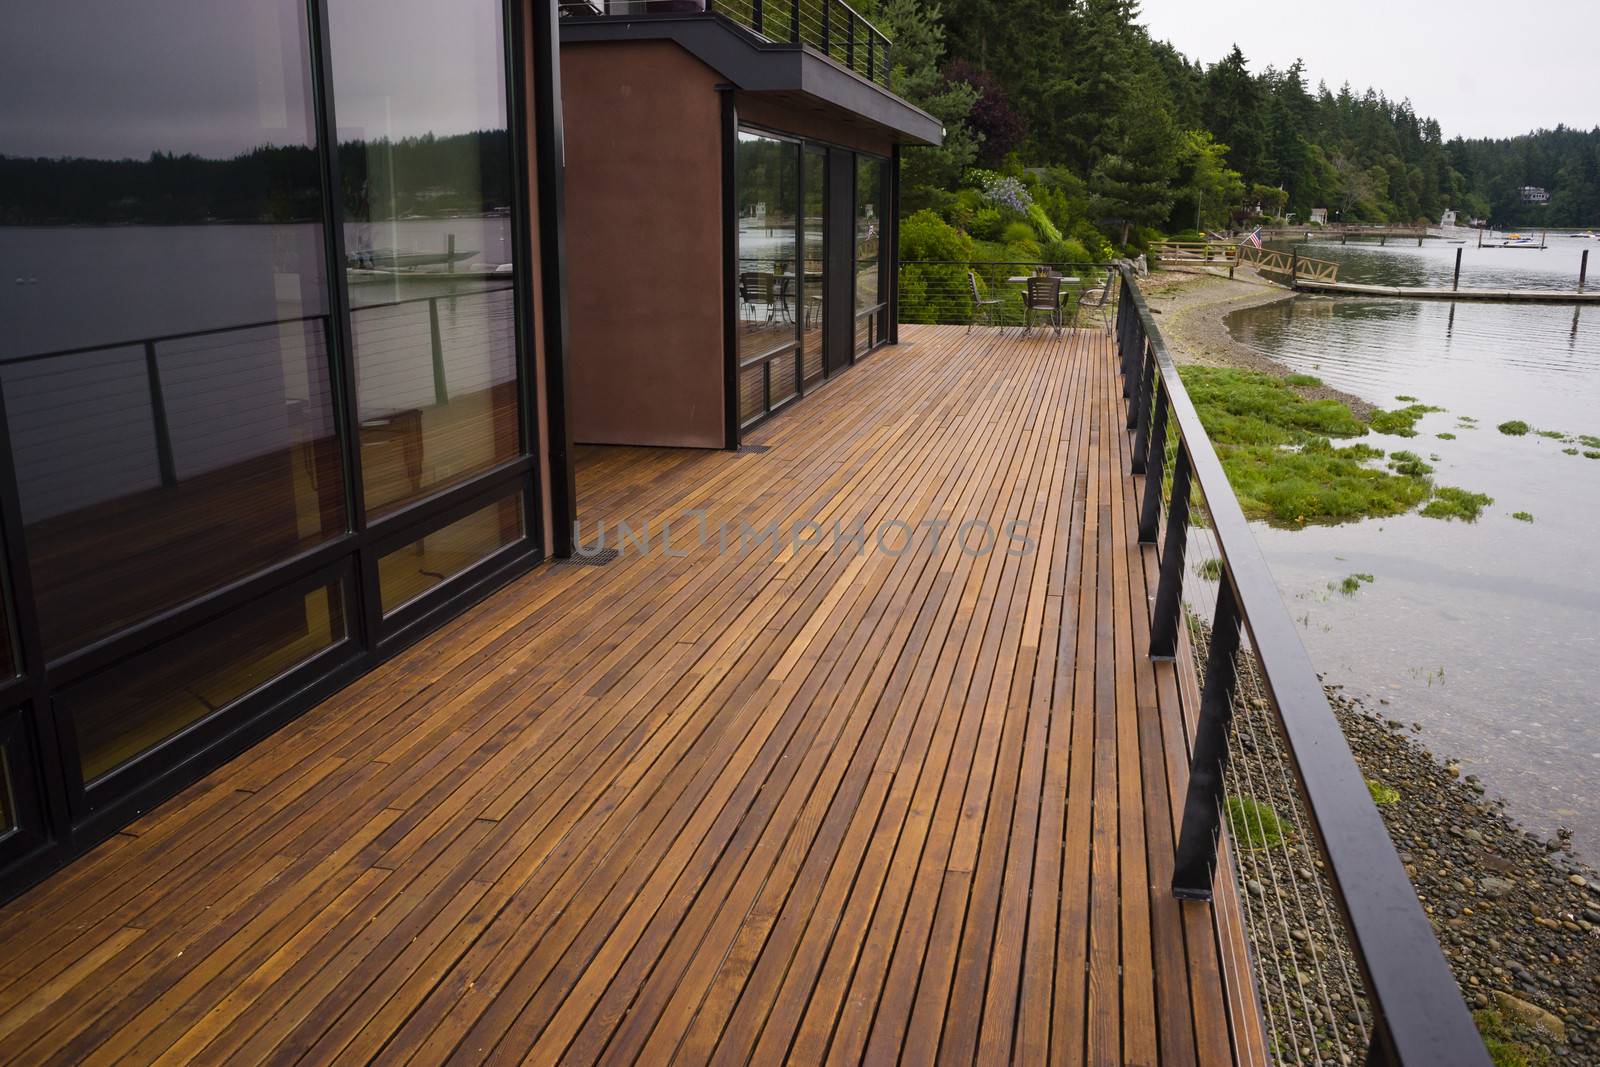 Wood Plank Deck Patio Beach Water Contemporary Waterfront Home by ChrisBoswell